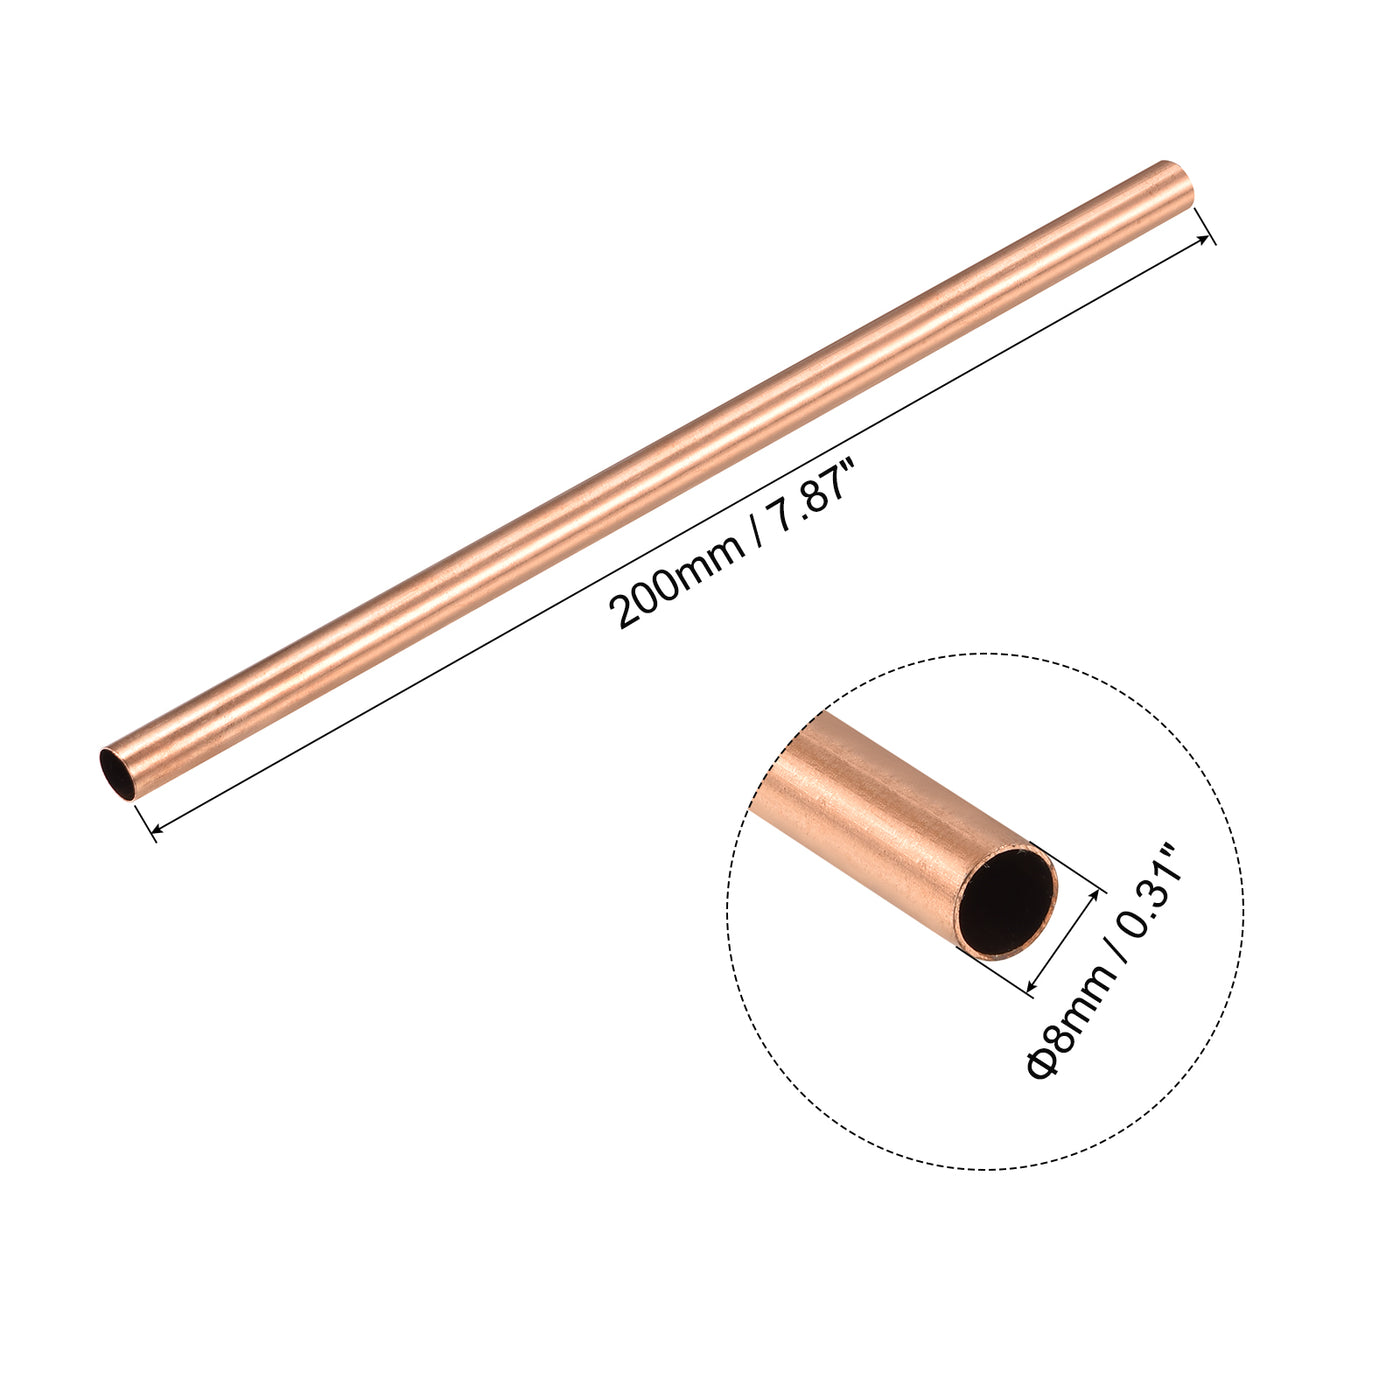 Uxcell Uxcell Copper Round Tube 7.5mm OD 1mm Wall Thickness 300mm Length Pipe Tubing